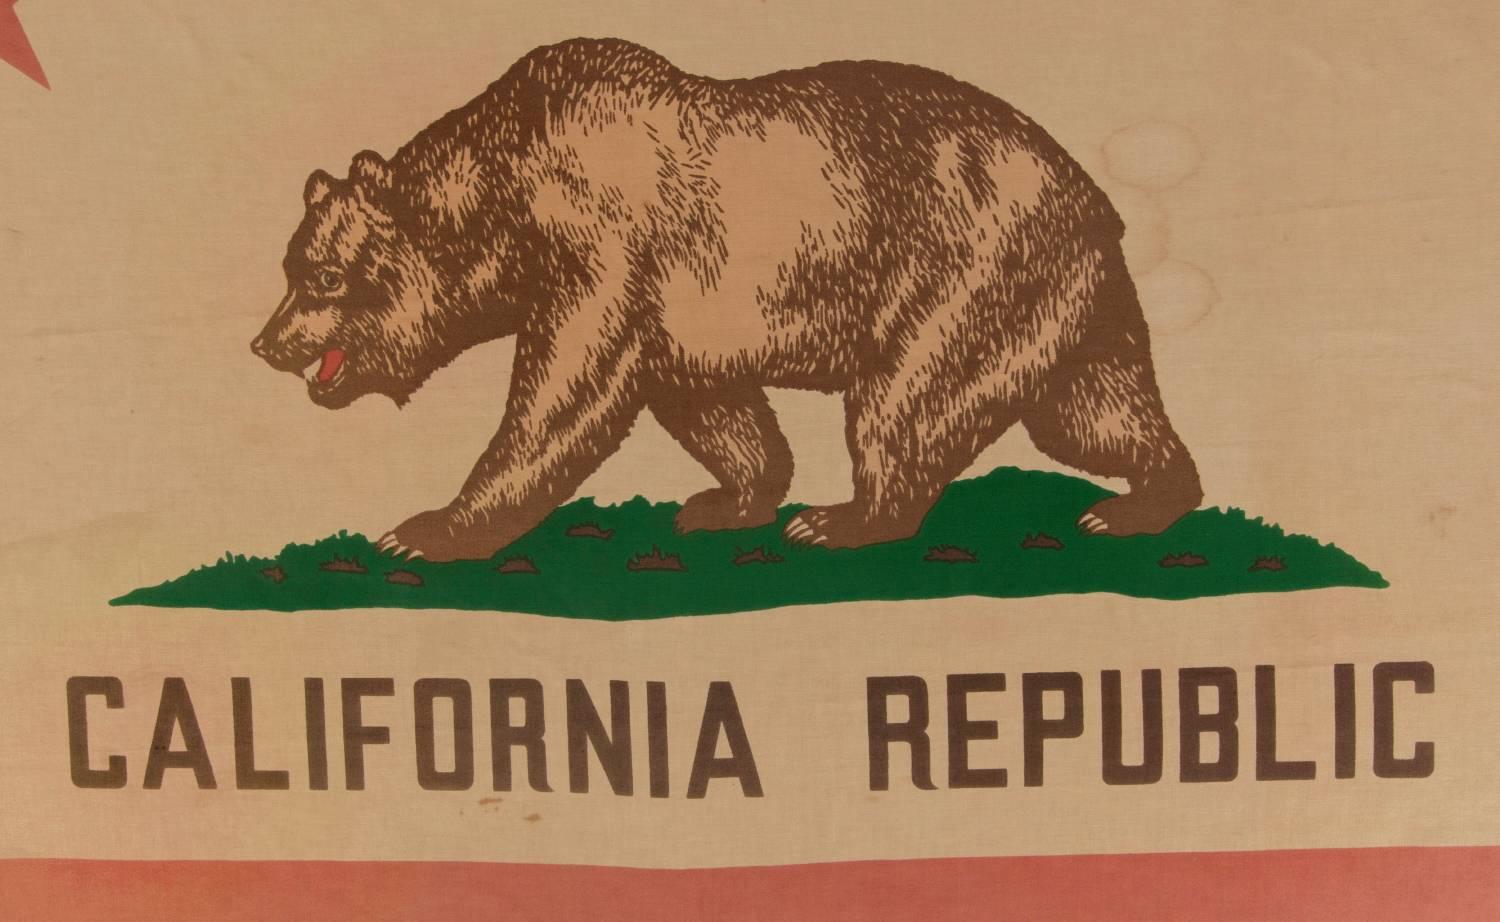 Vintage California state flag, circa 1950s-1960s:

Early state flags fall between very scarce and extraordinarily rare in the antiques marketplace. One primary reason for this is that most states, even if they existed during the 18th or 19th